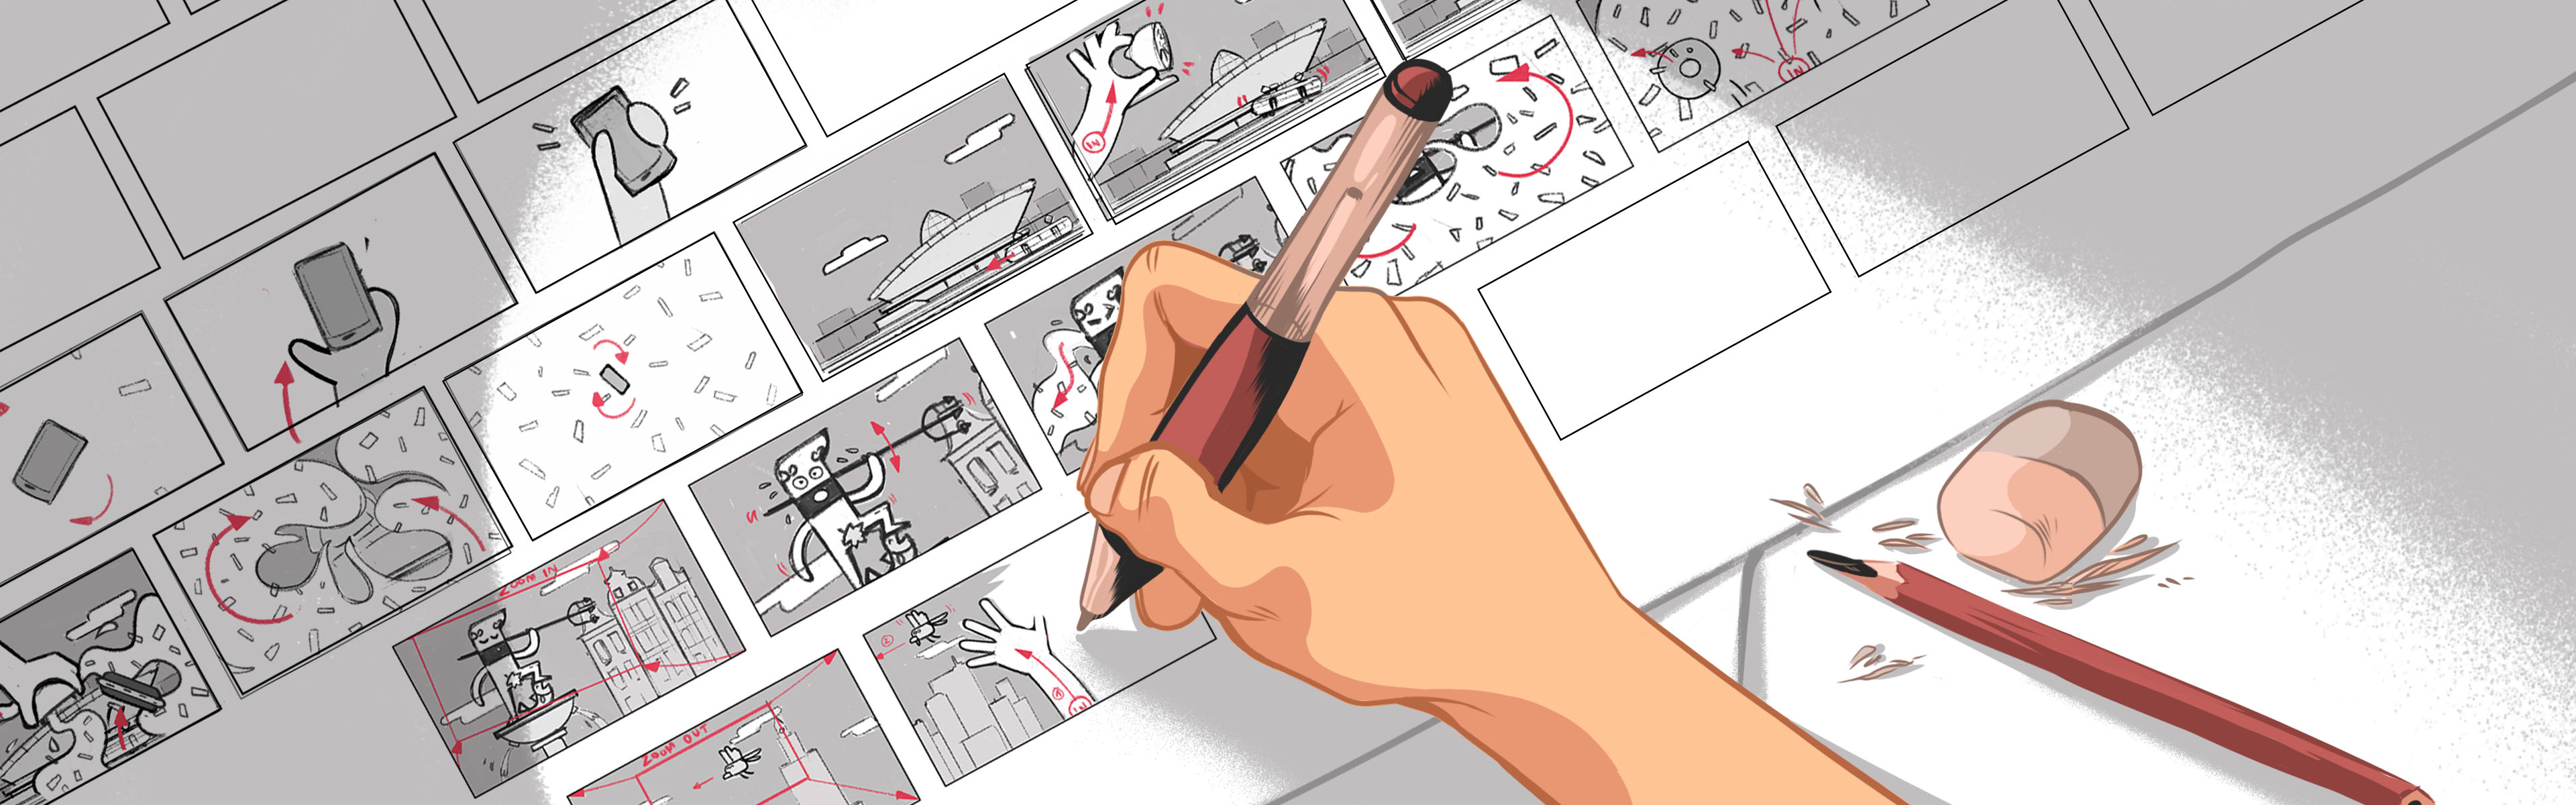 What is a storyboard artist and what they do?